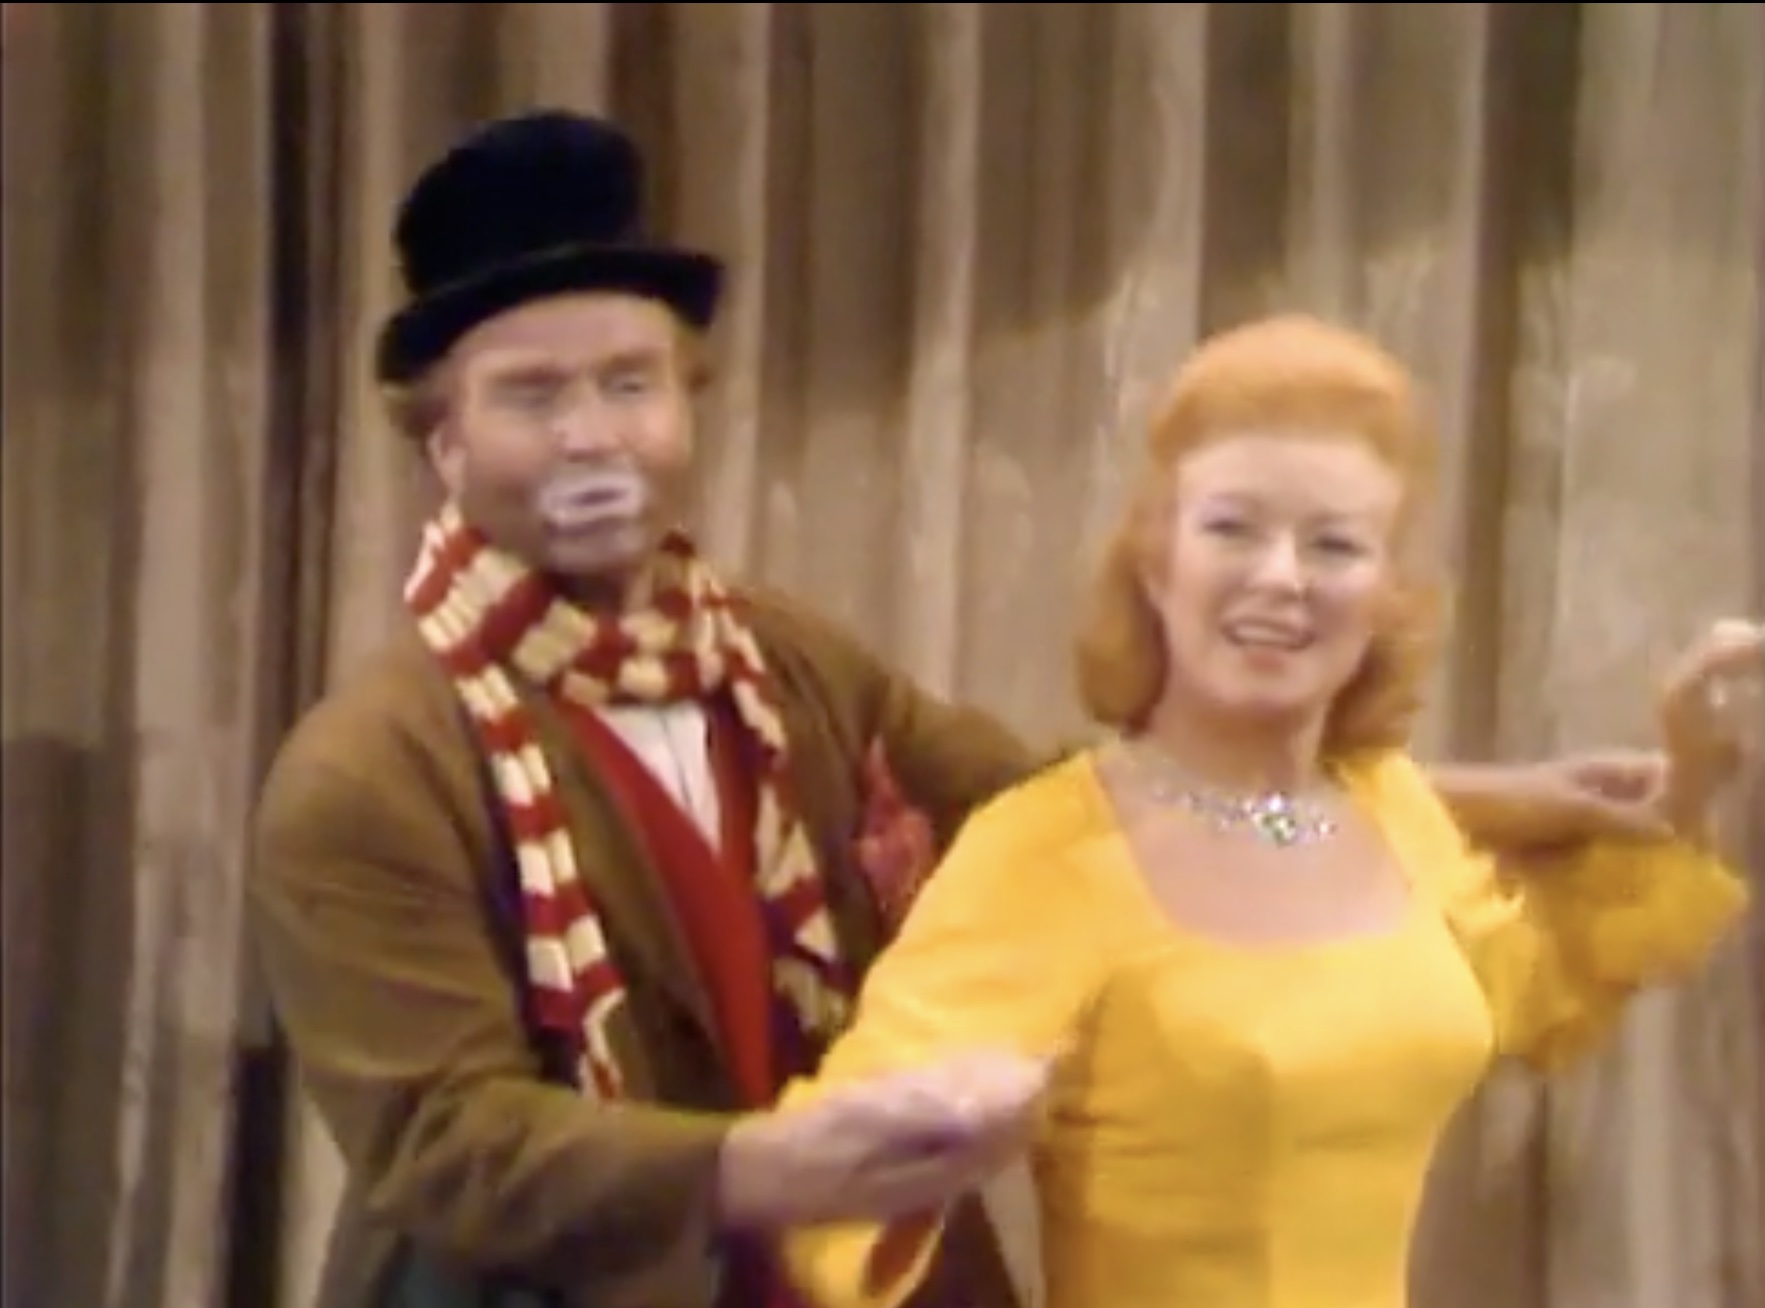 Freddie the Freeloader and Greer Garson dance onstage in "The Christmas Spirit"